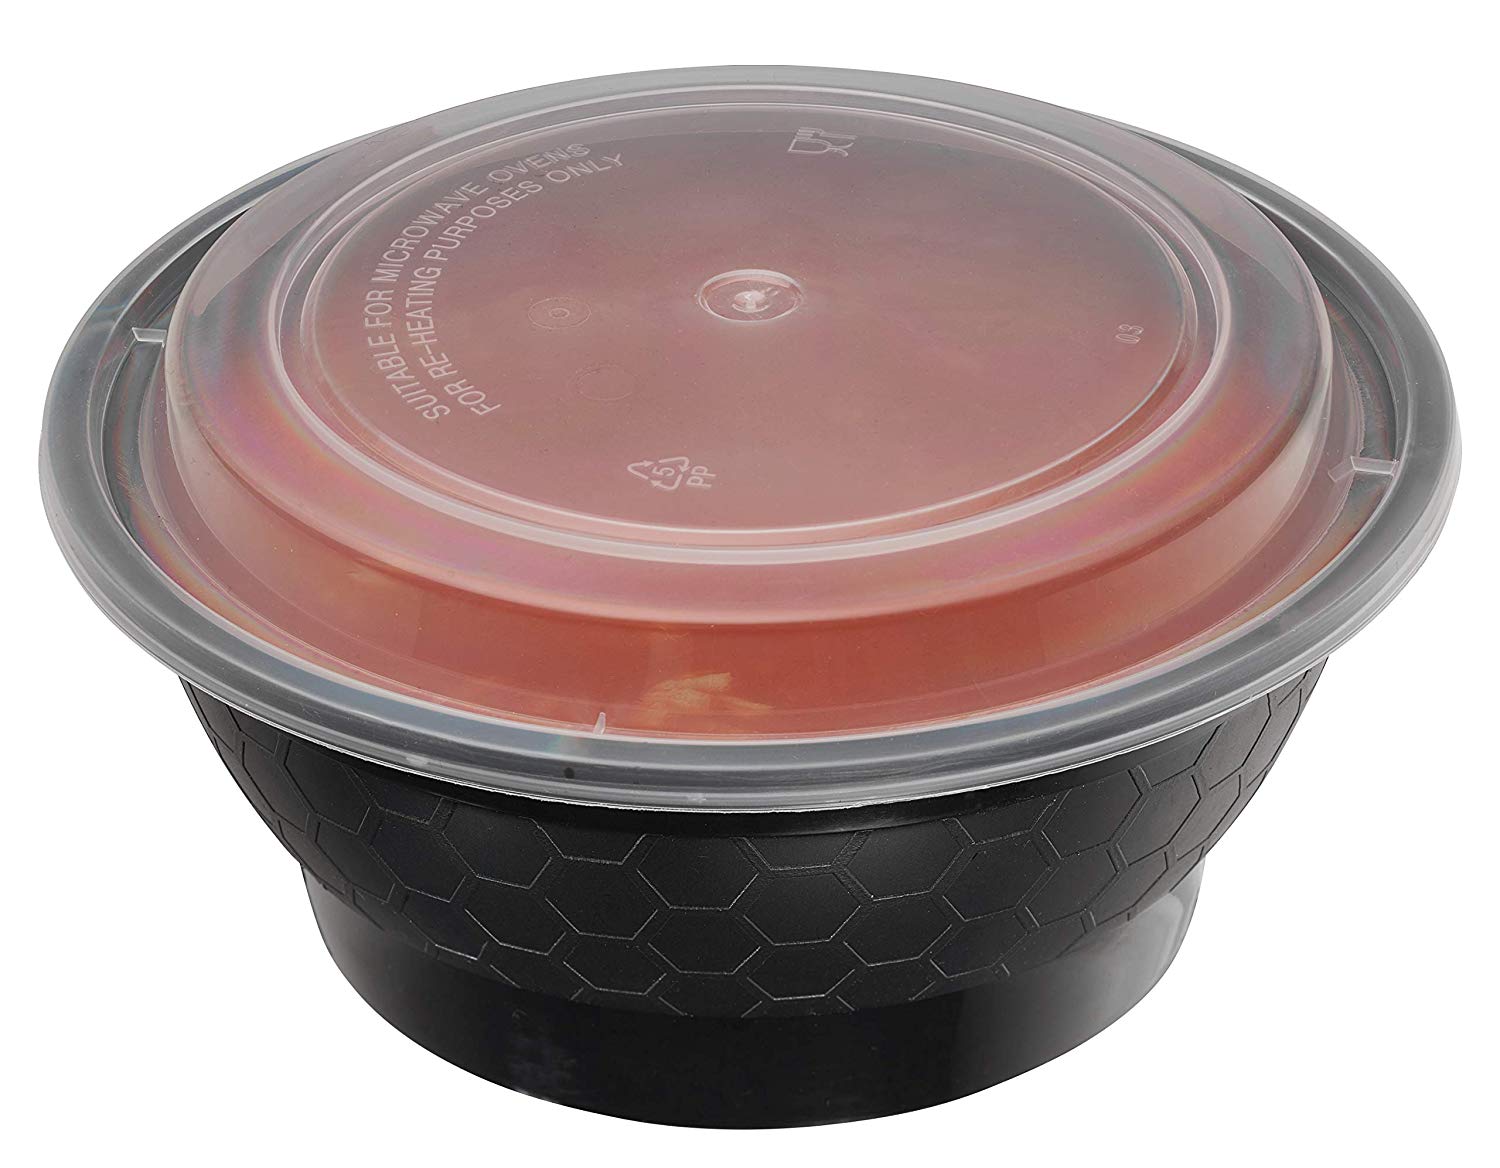 Meal Prep Containers 40oz Round Bowls with Lids, Disposable Food Storage Bento Box, Microwavable, Premium Bowl, Stir Fry, Ramen, Soup | Lunch Box | BPA Free | Dishwasher Safe